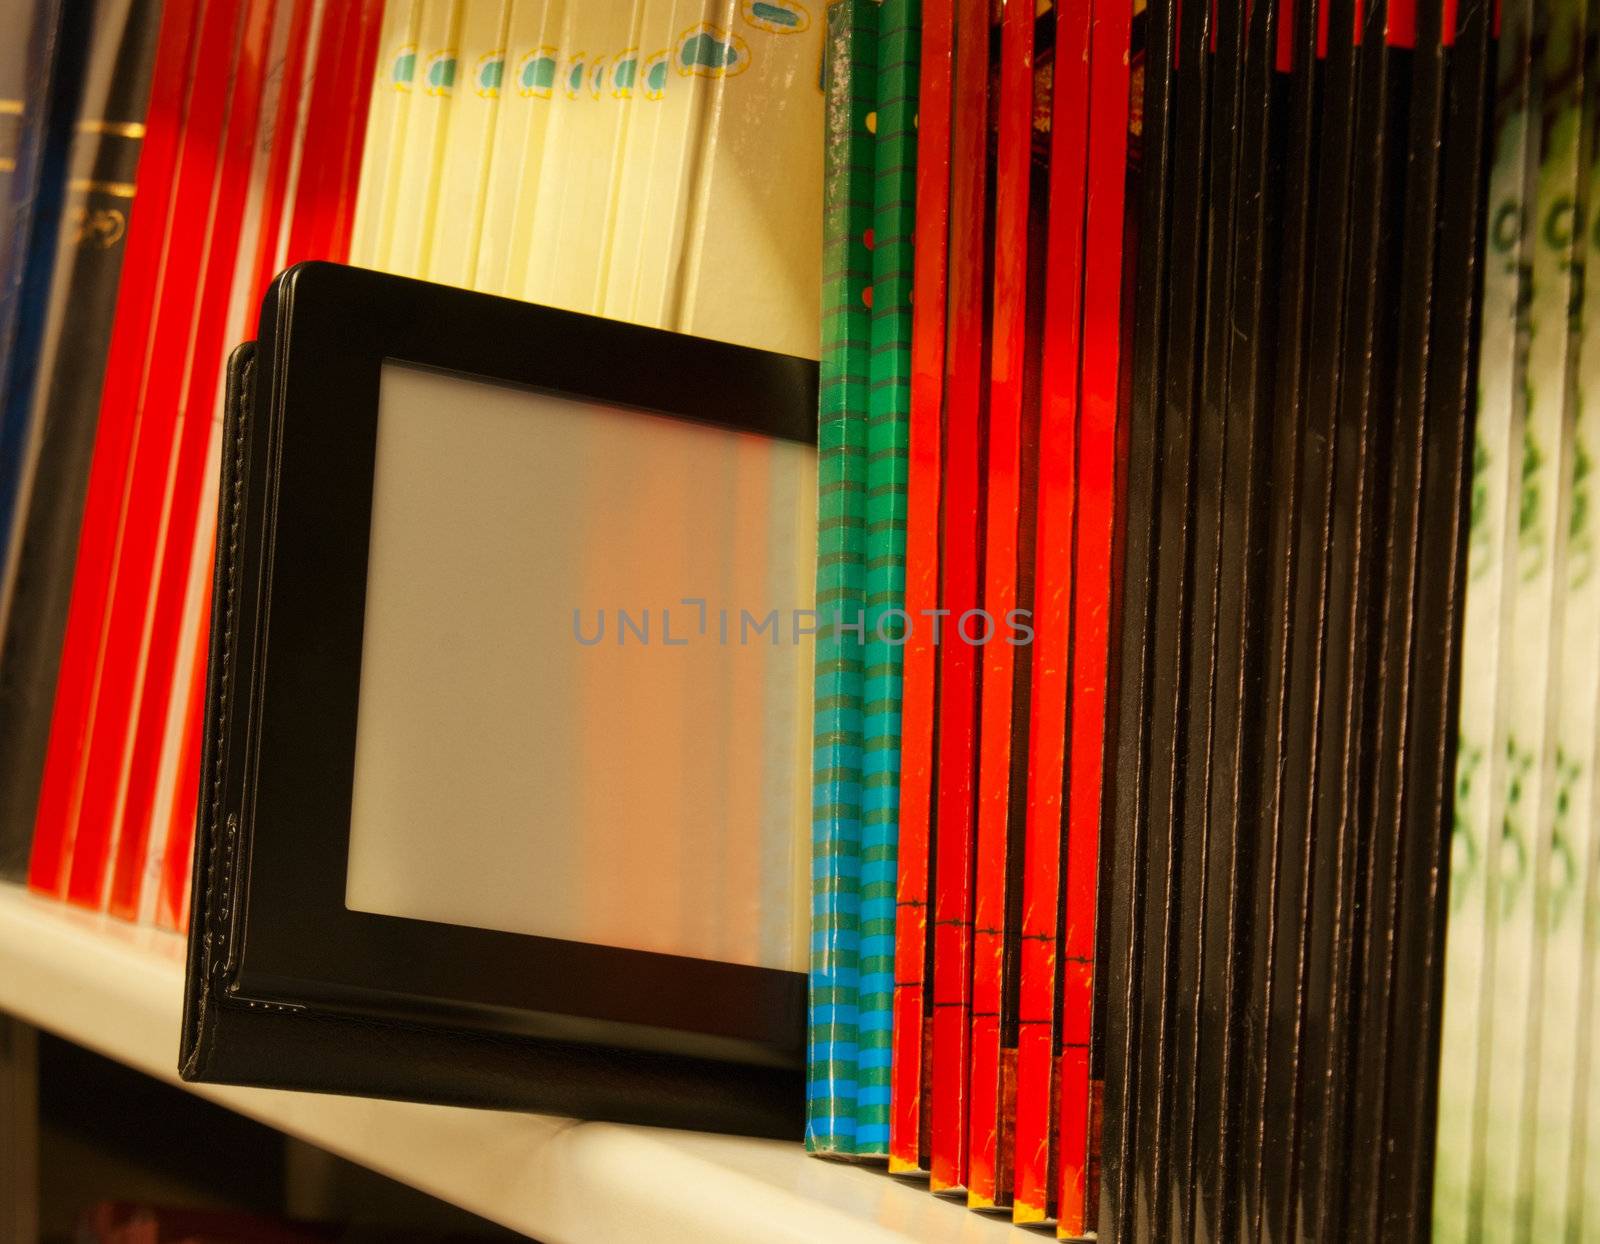 Row of colorful books and electronic book reader on the shelf